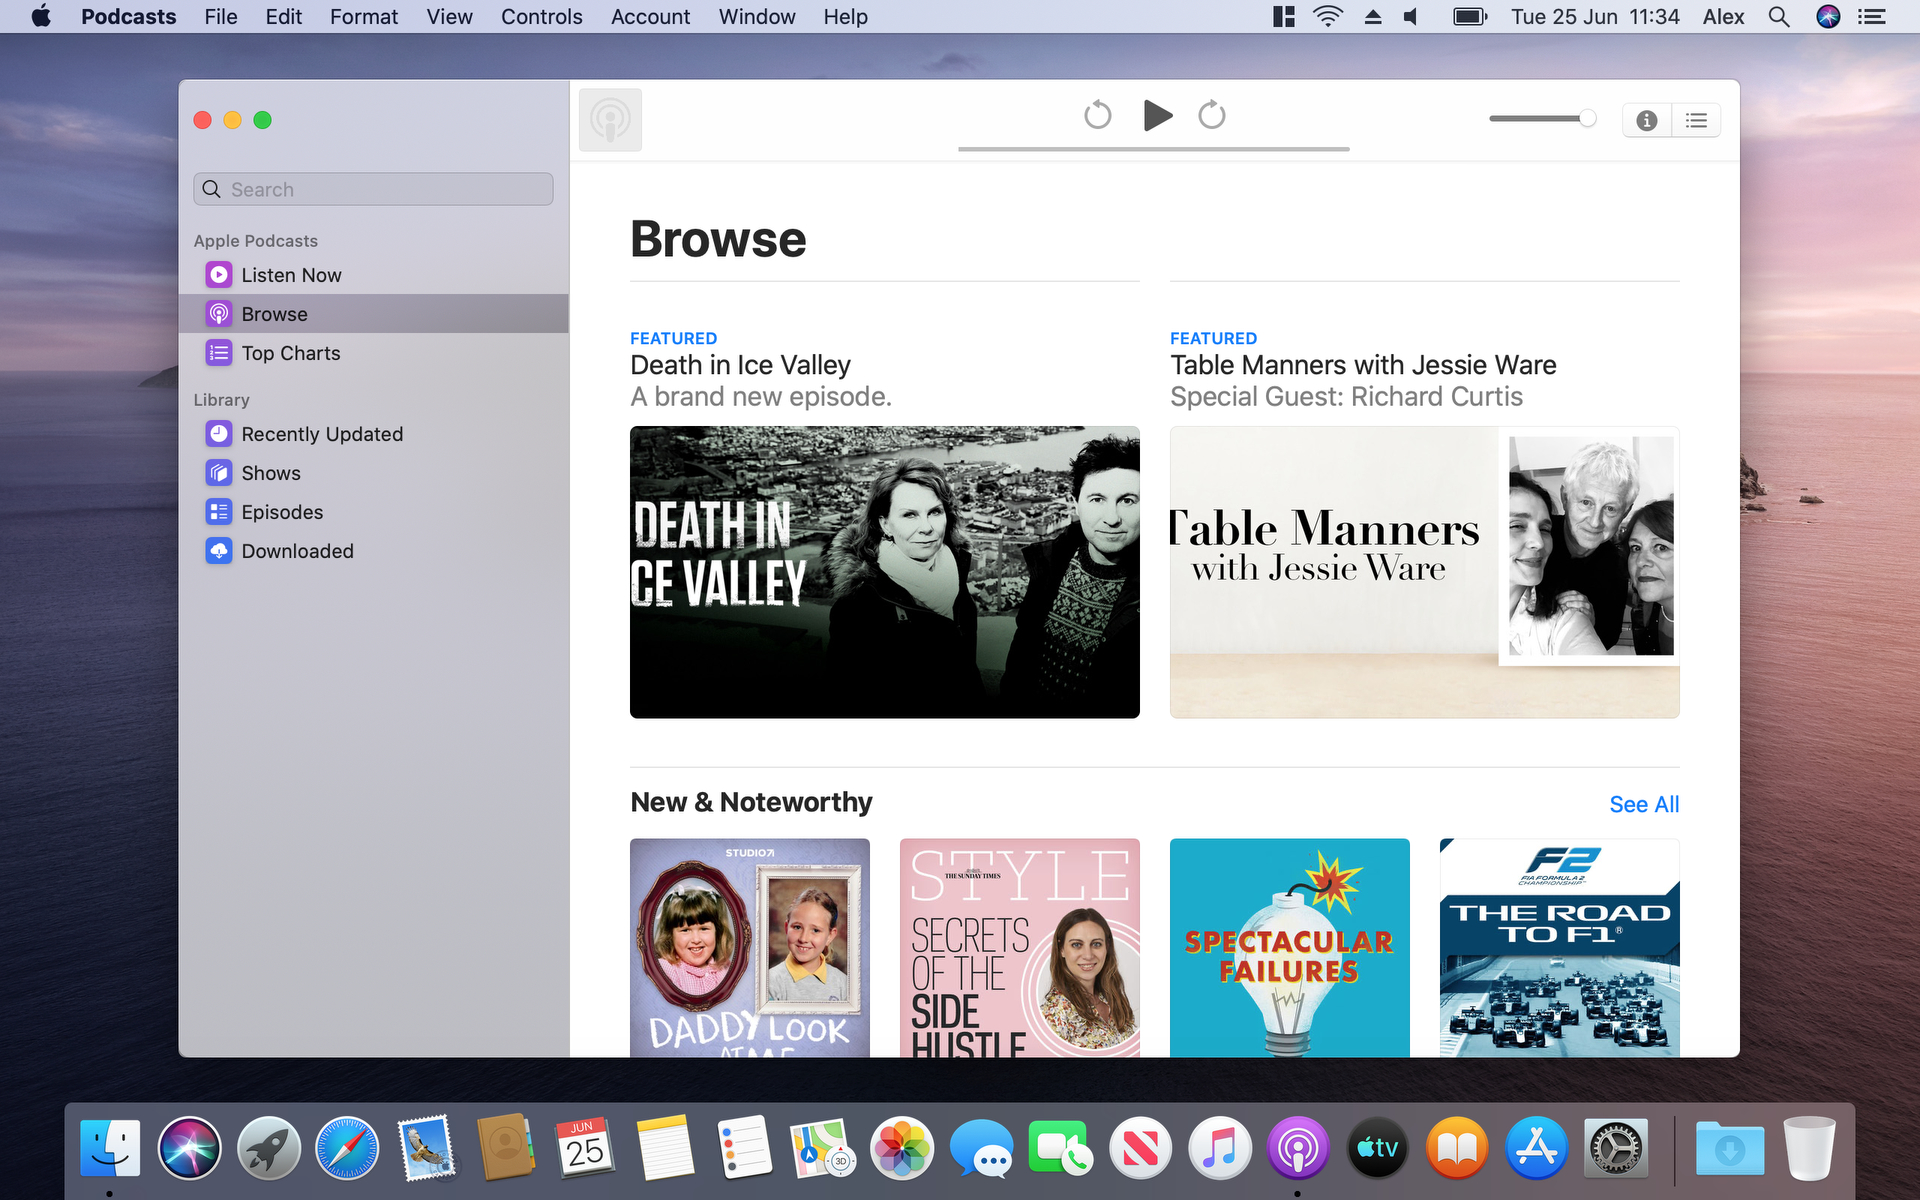 Apple Podcasts | MacOS Catalina Hands-On